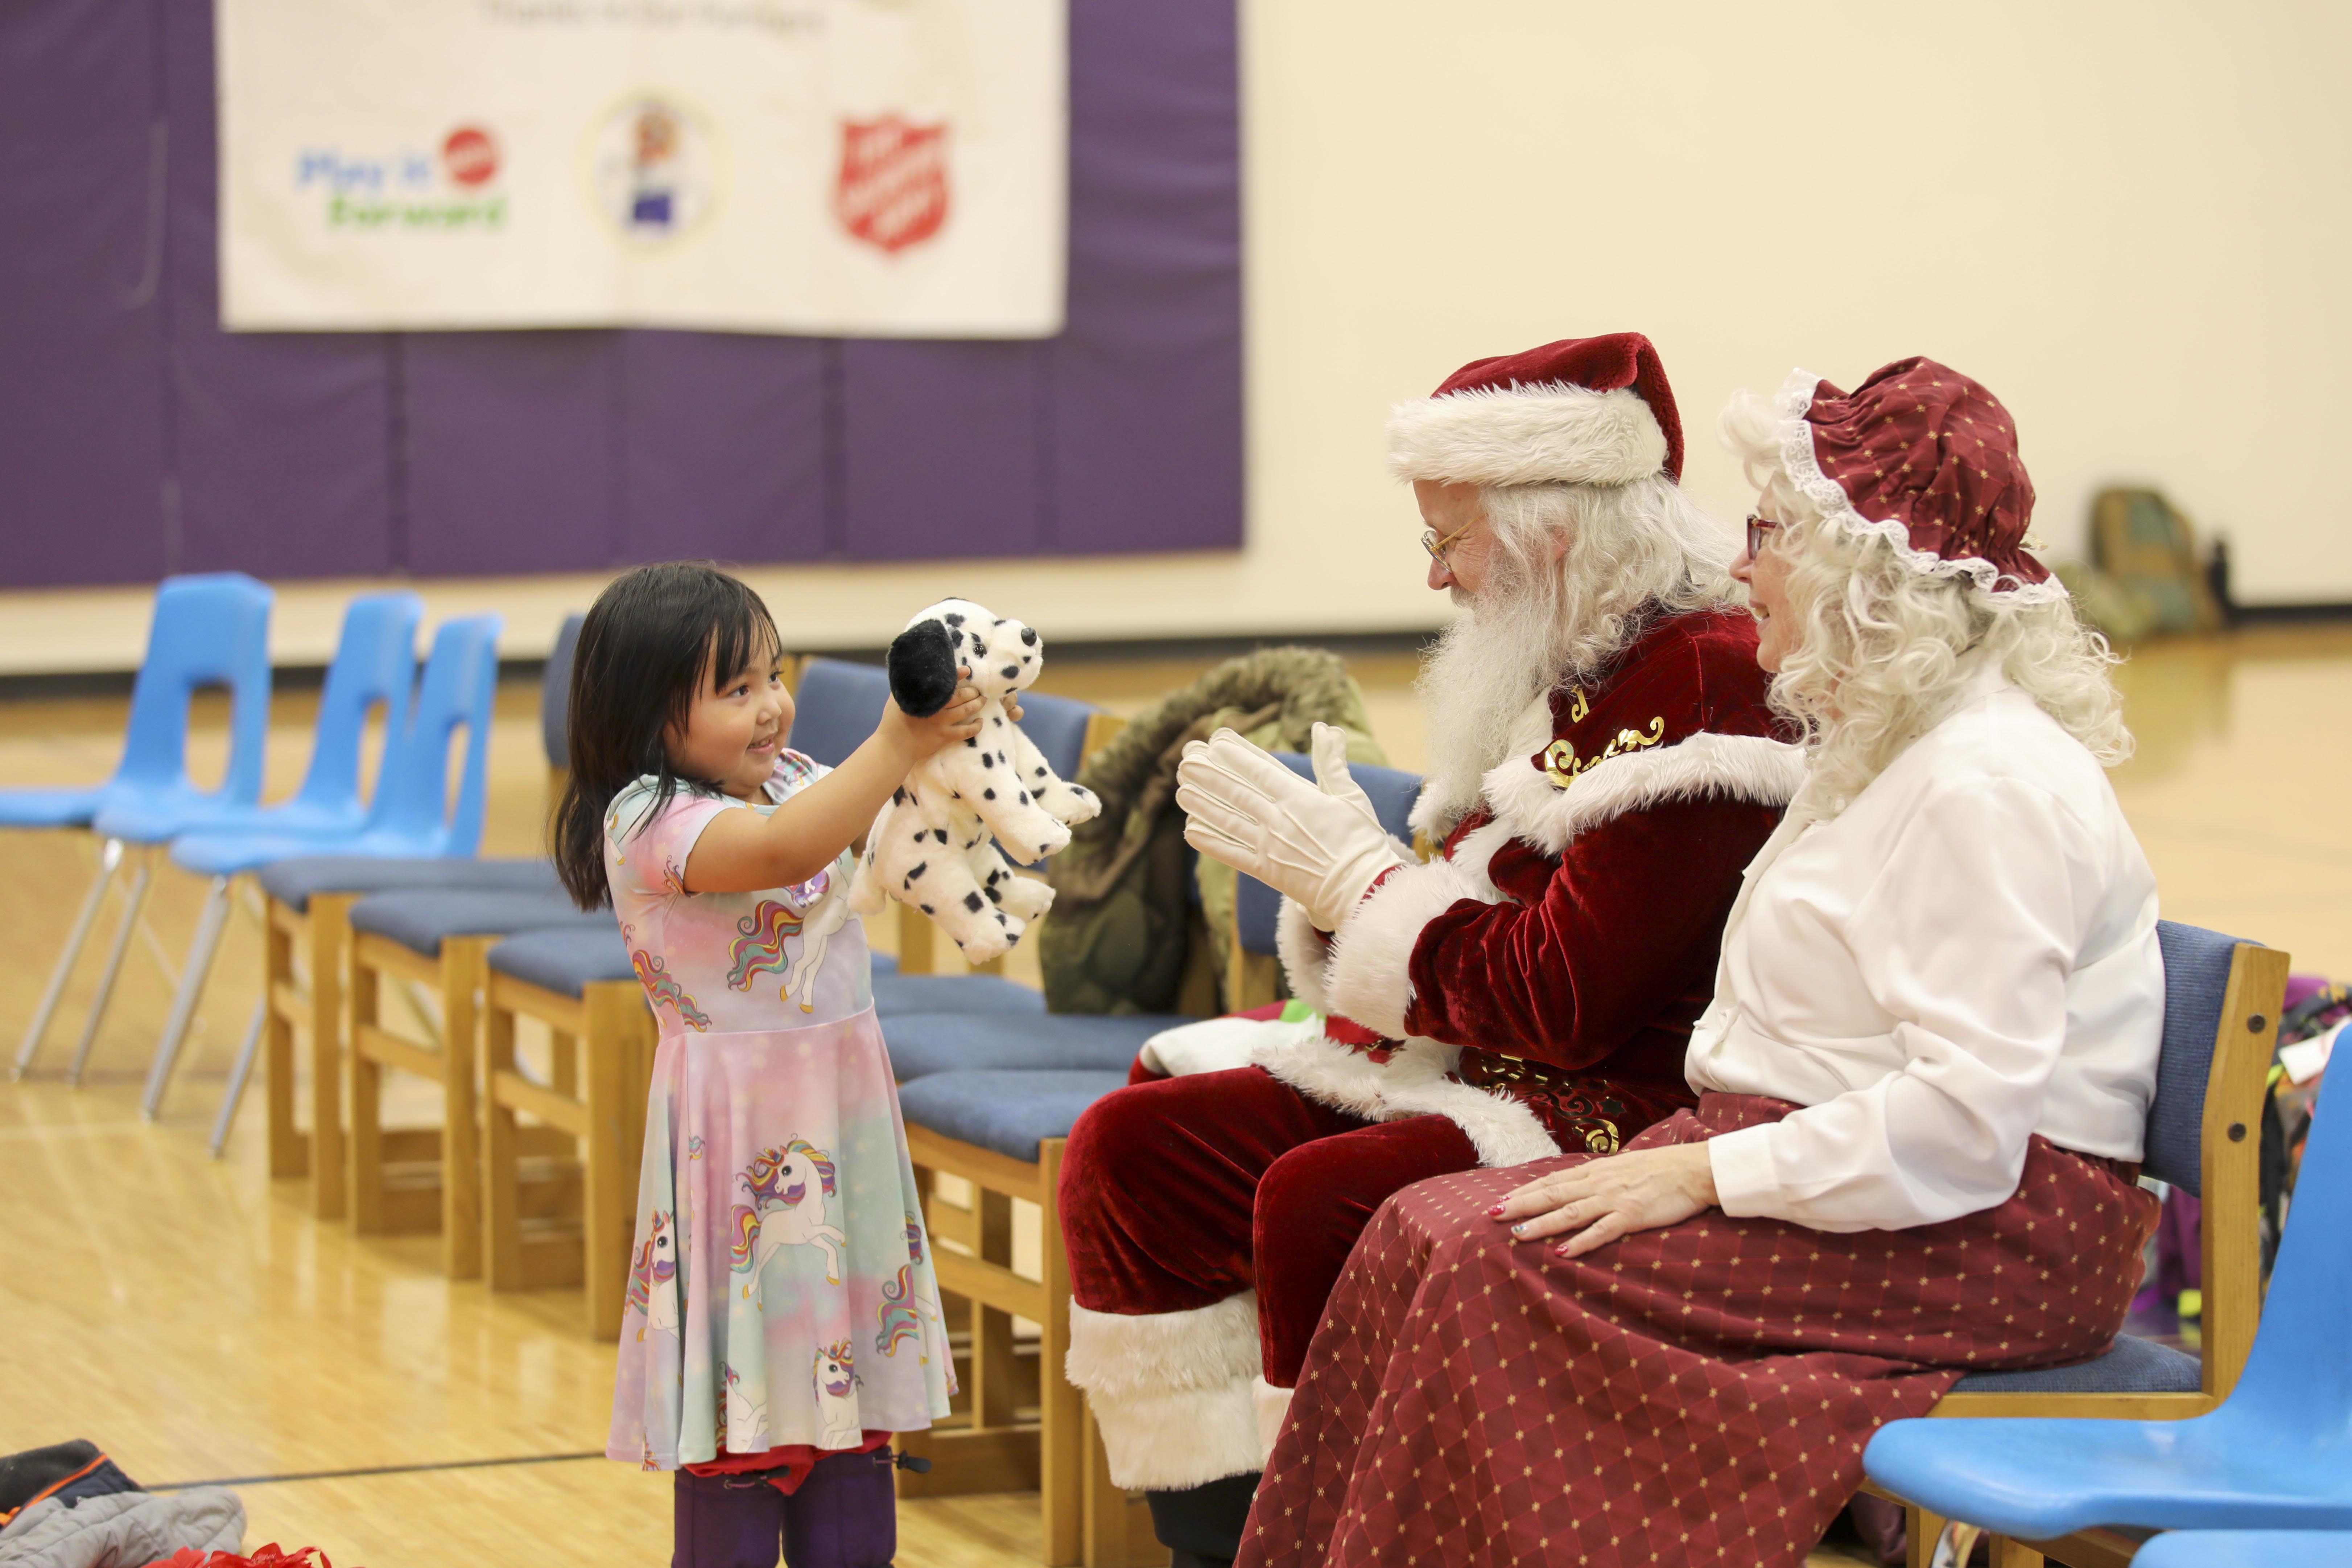 A child shows a stuffed animal to Santa and Mrs. Claus.